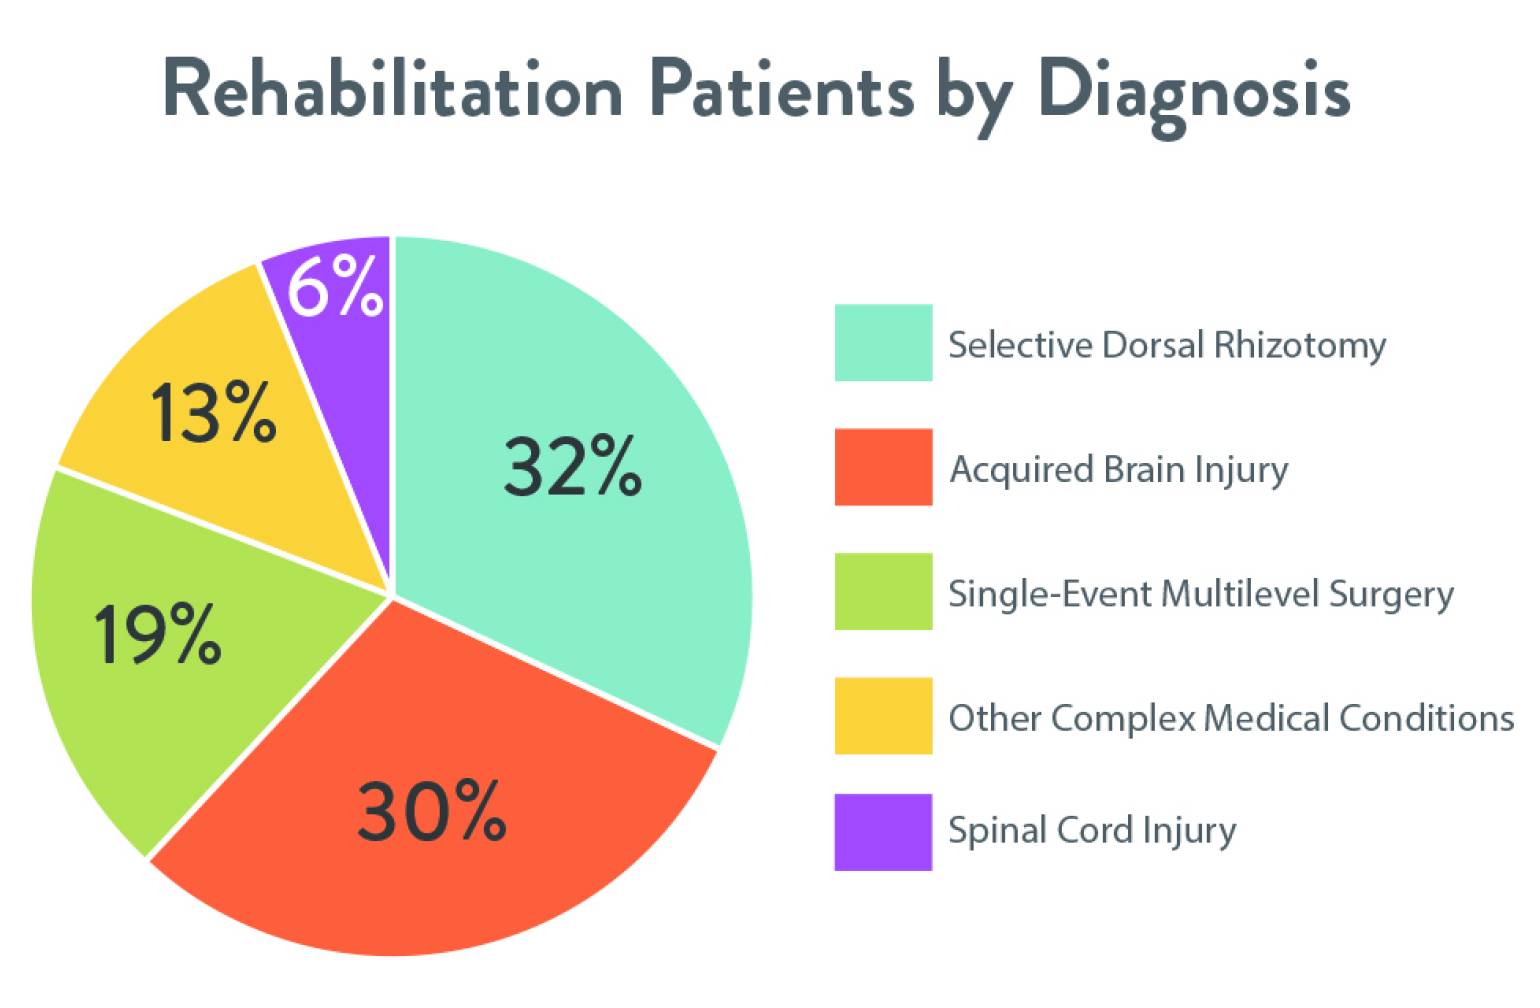 Rehabilitation patients by diagnosis at Gillette children's specialty healthcare